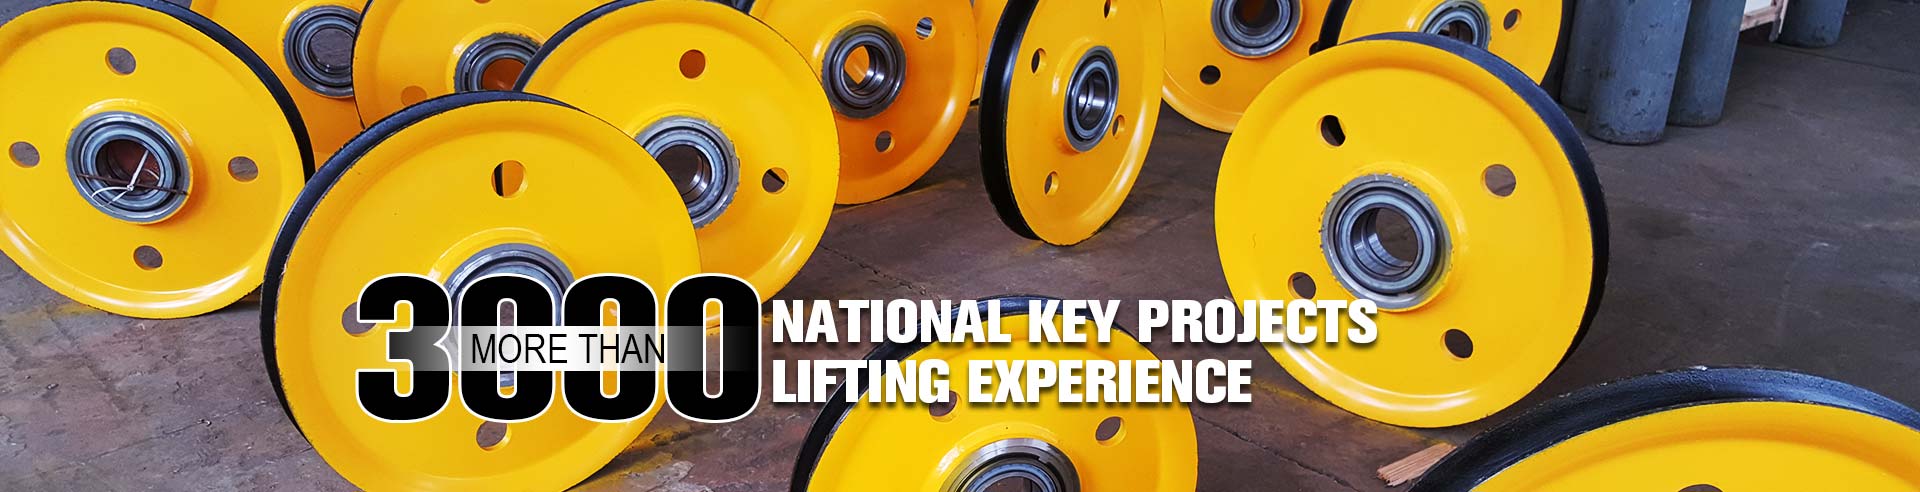 3000 More Than National Key Projects Lifting Experience